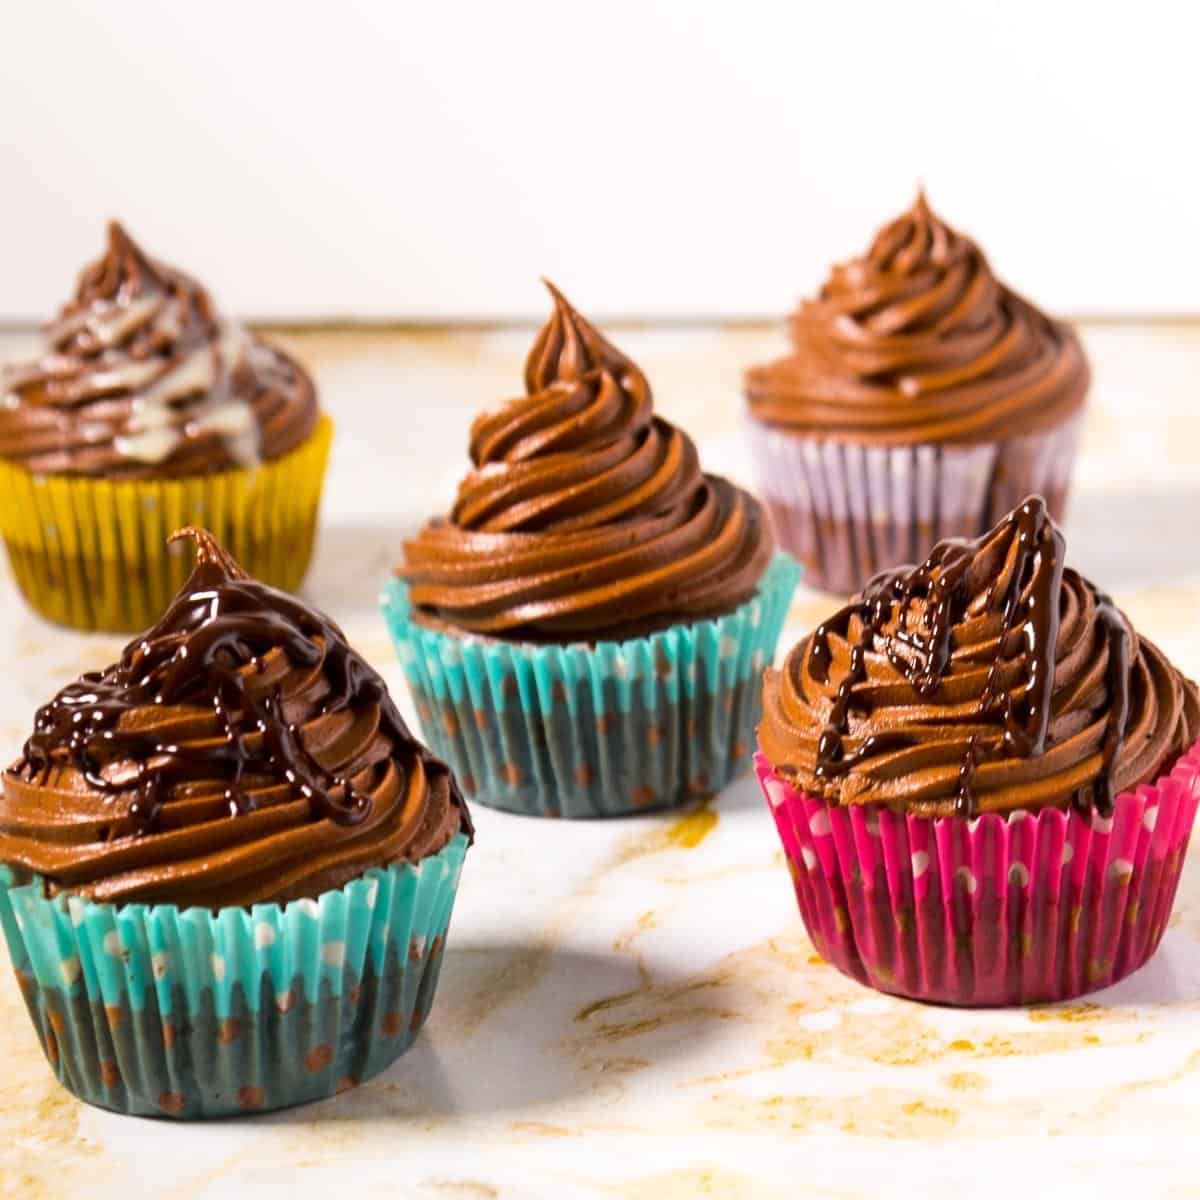 Five frosted chocolate cupcakes